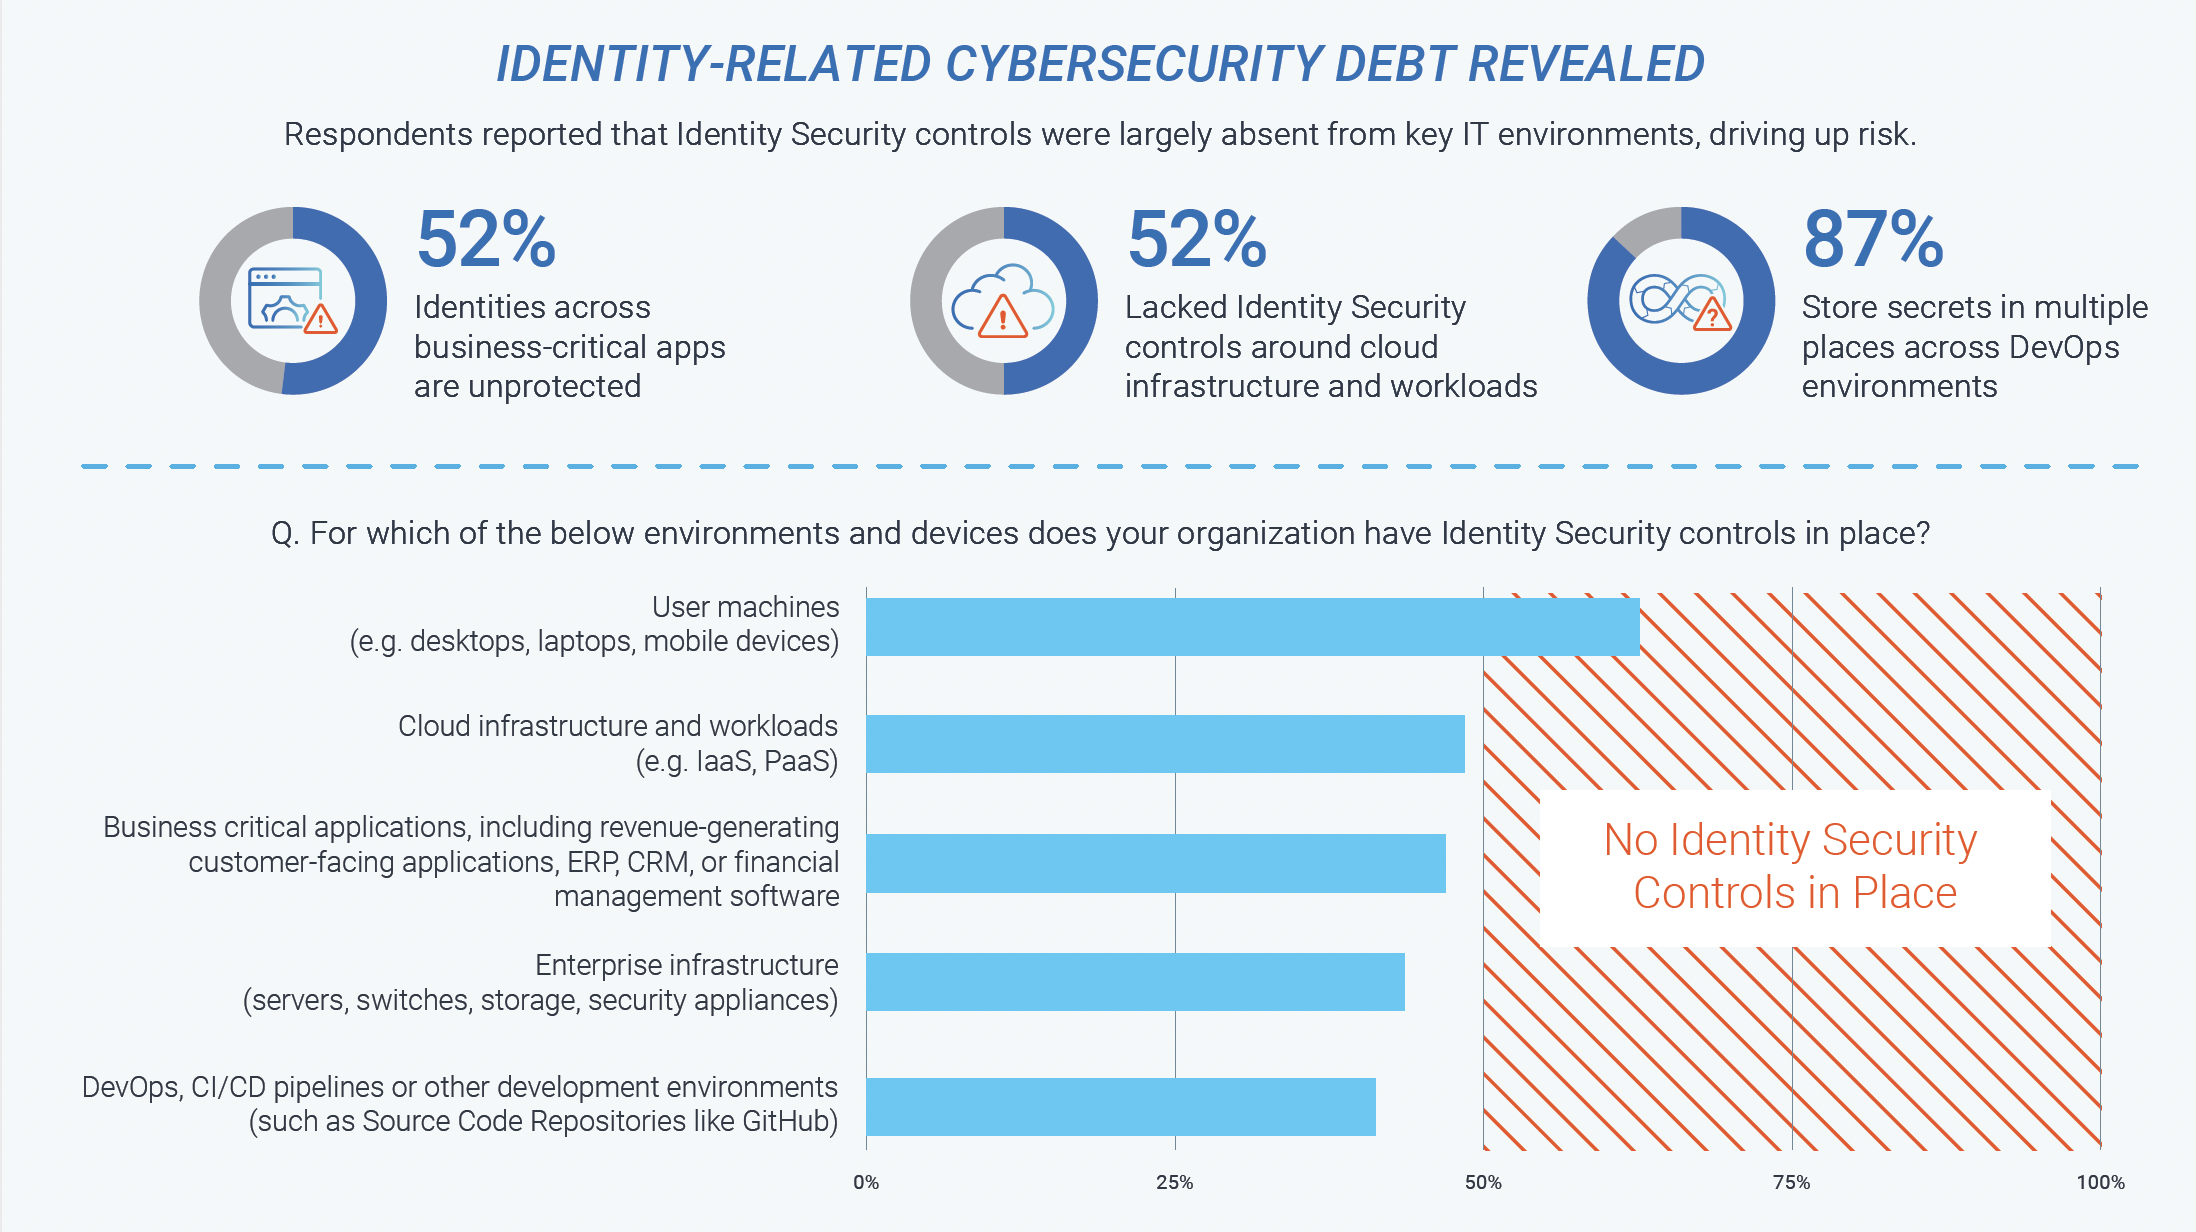 Identity Security controls were largely absent from key IT environments